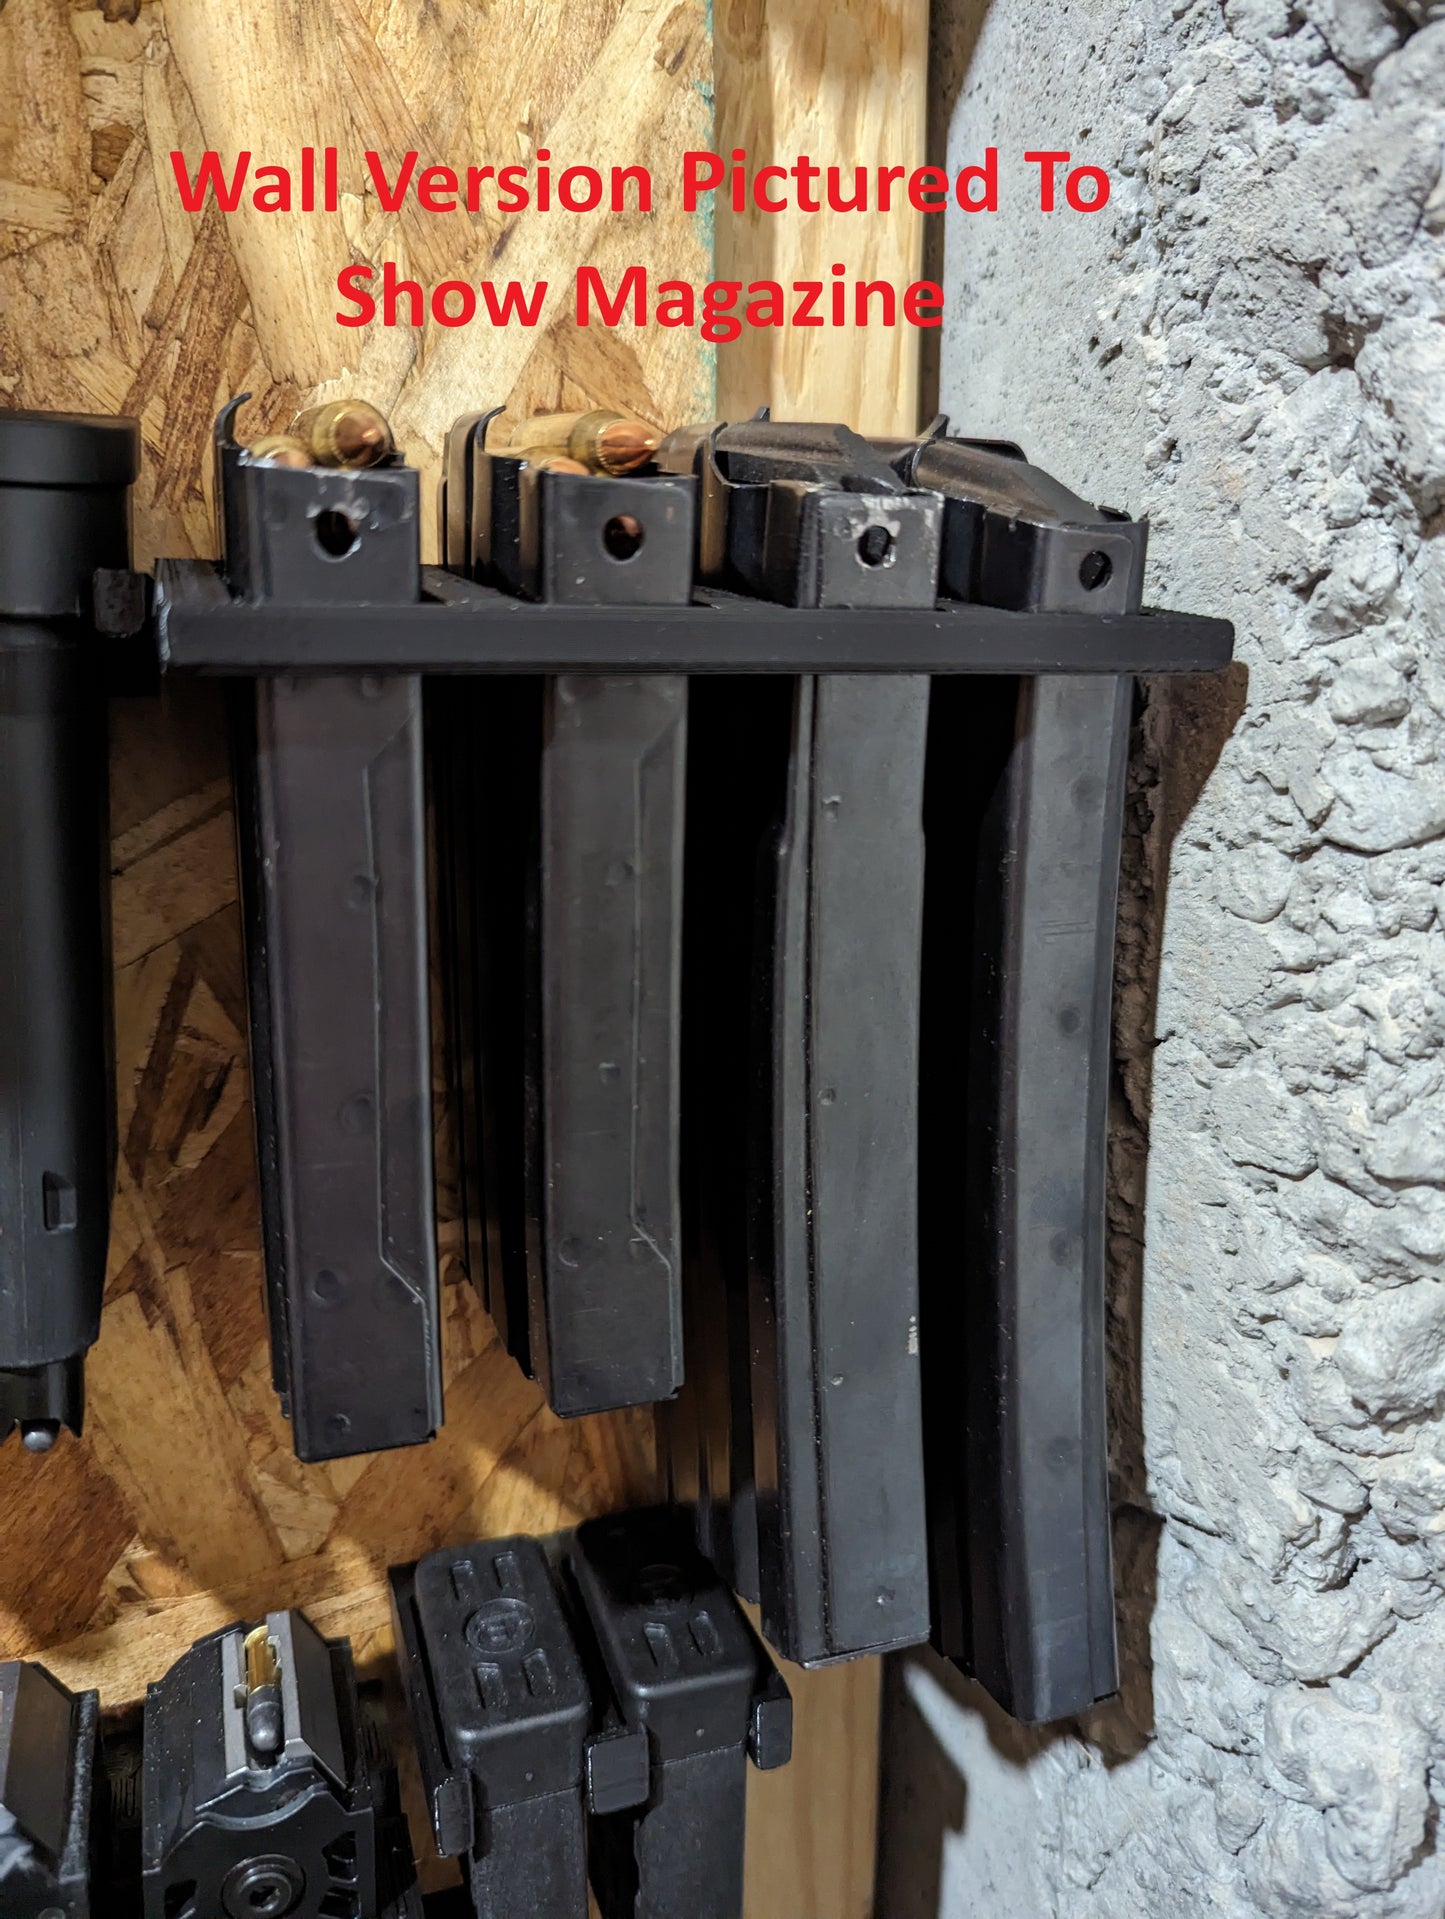 Mount for Ruger Mini-14 Mags - Gridwall | Magazine Holder Storage Rack